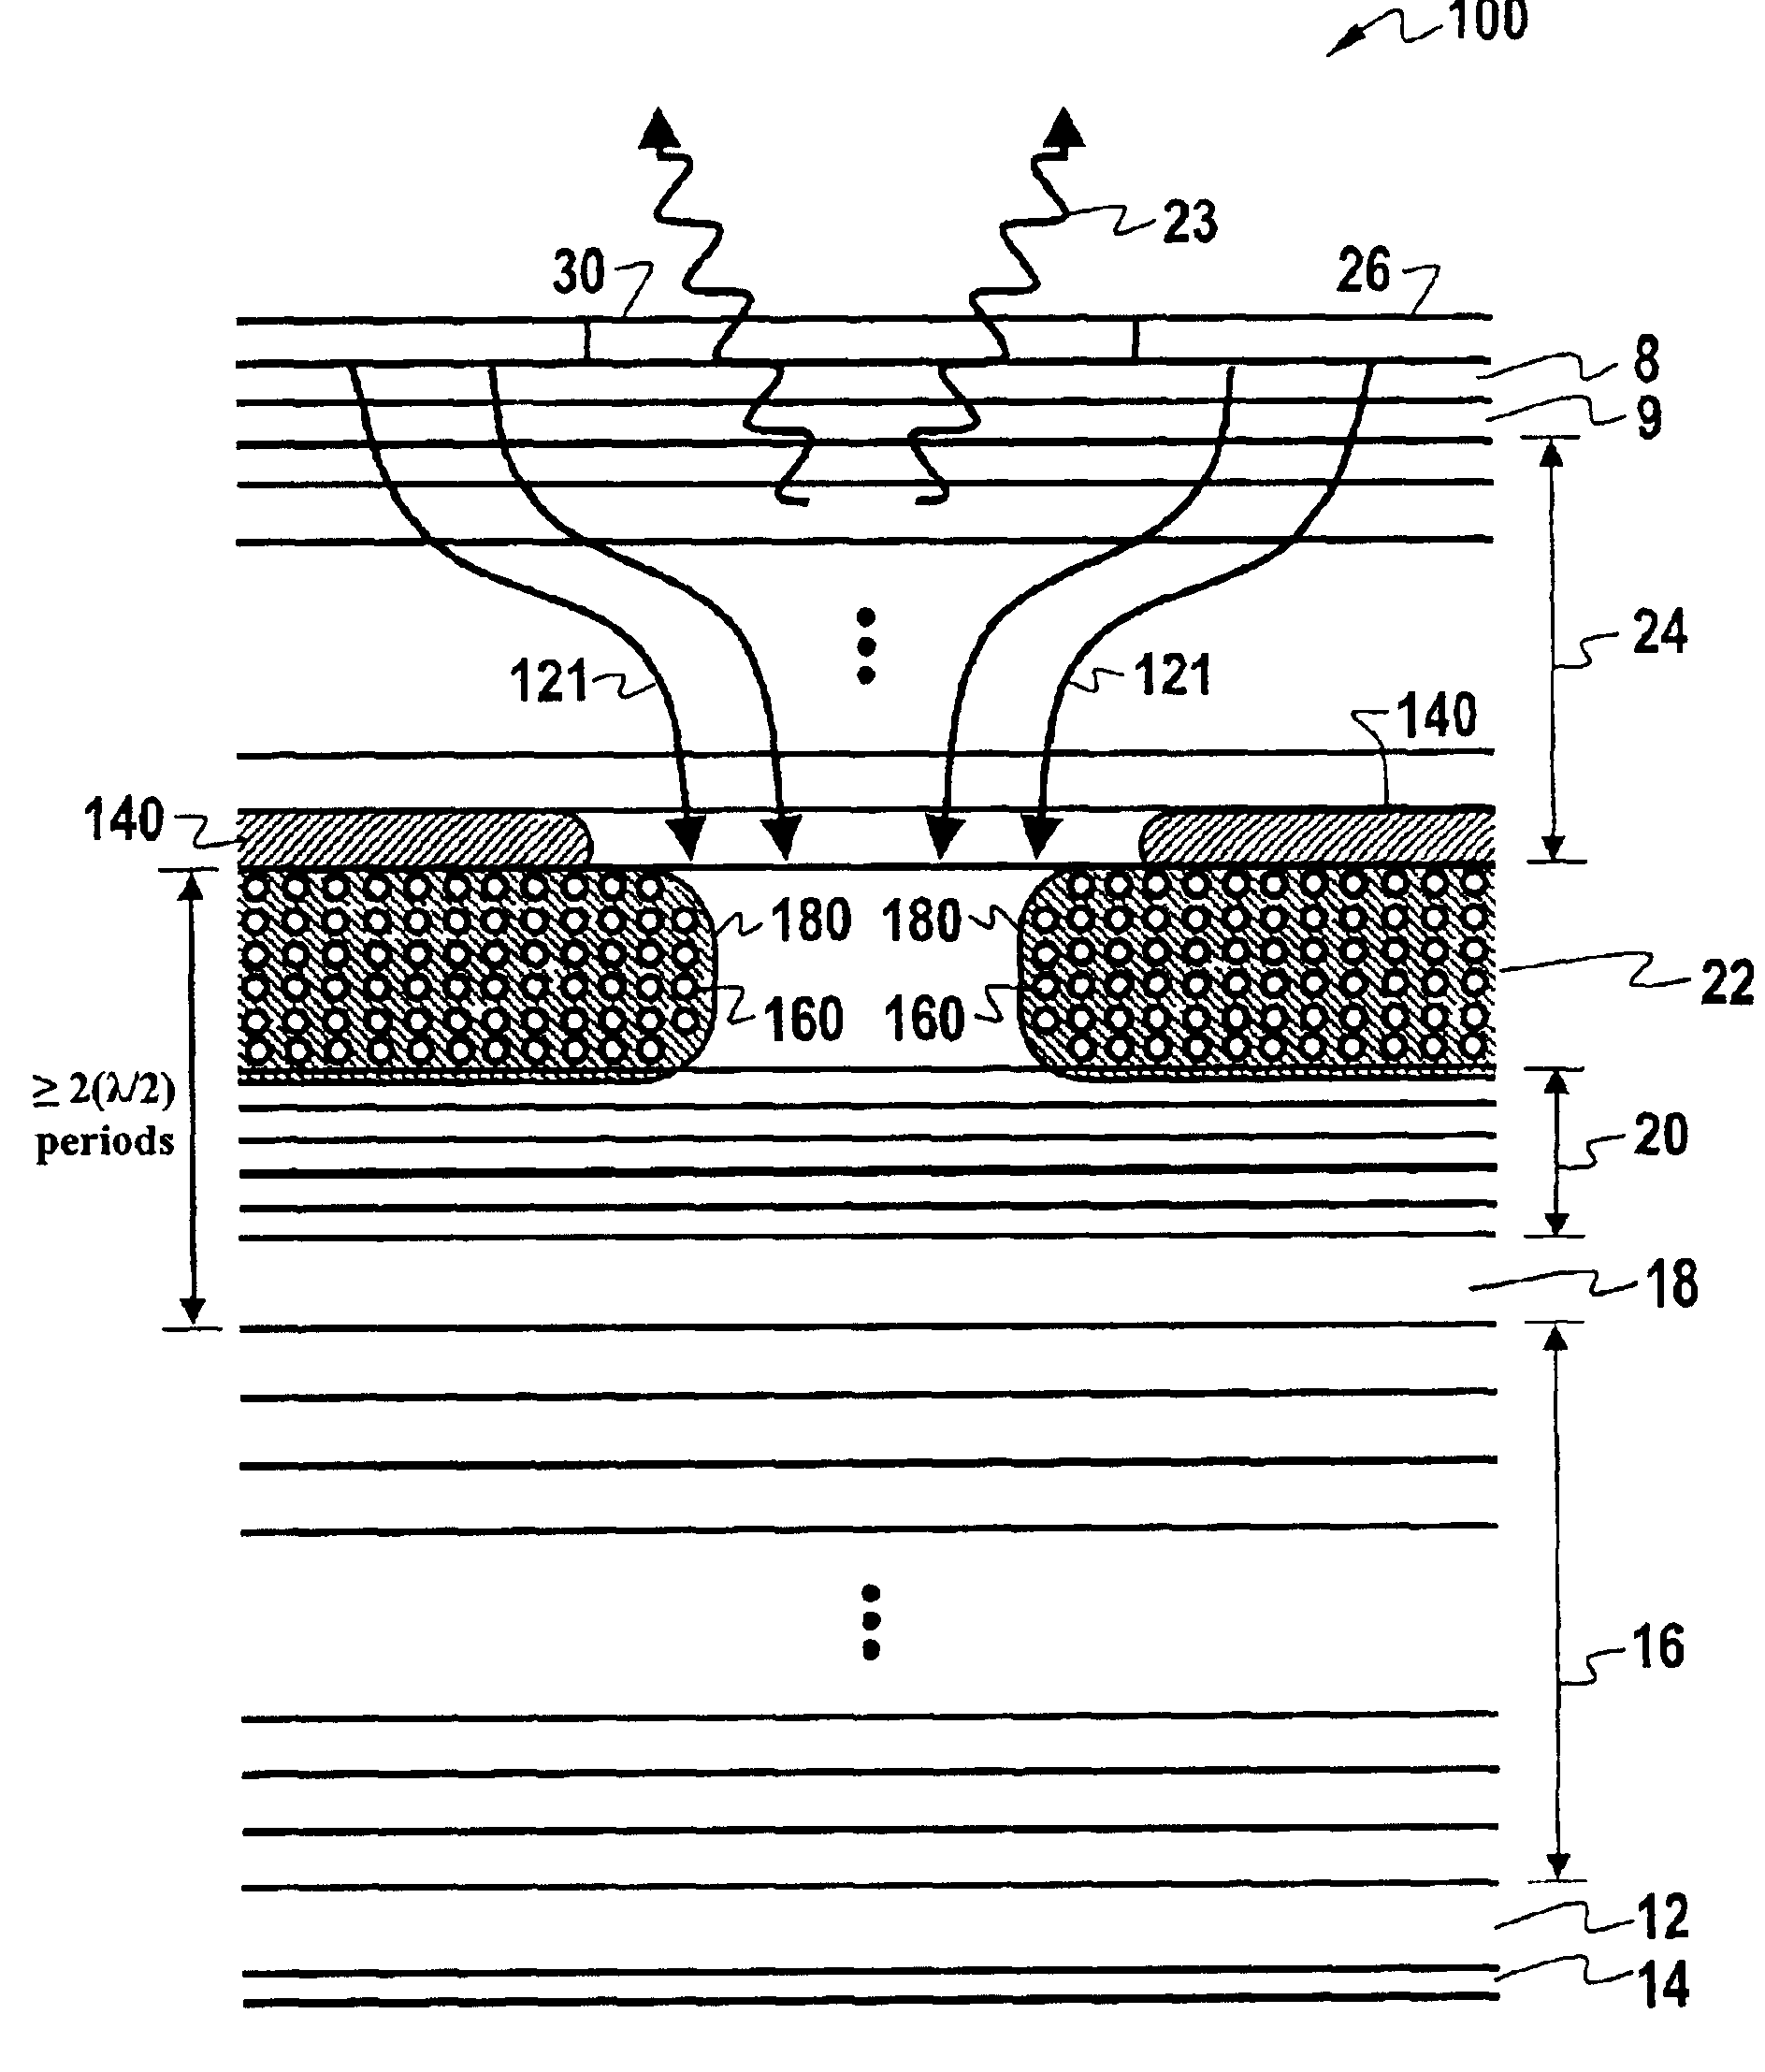 Vertical cavity surface emitting laser having a gain guide aperture interior to an oxide confinement layer